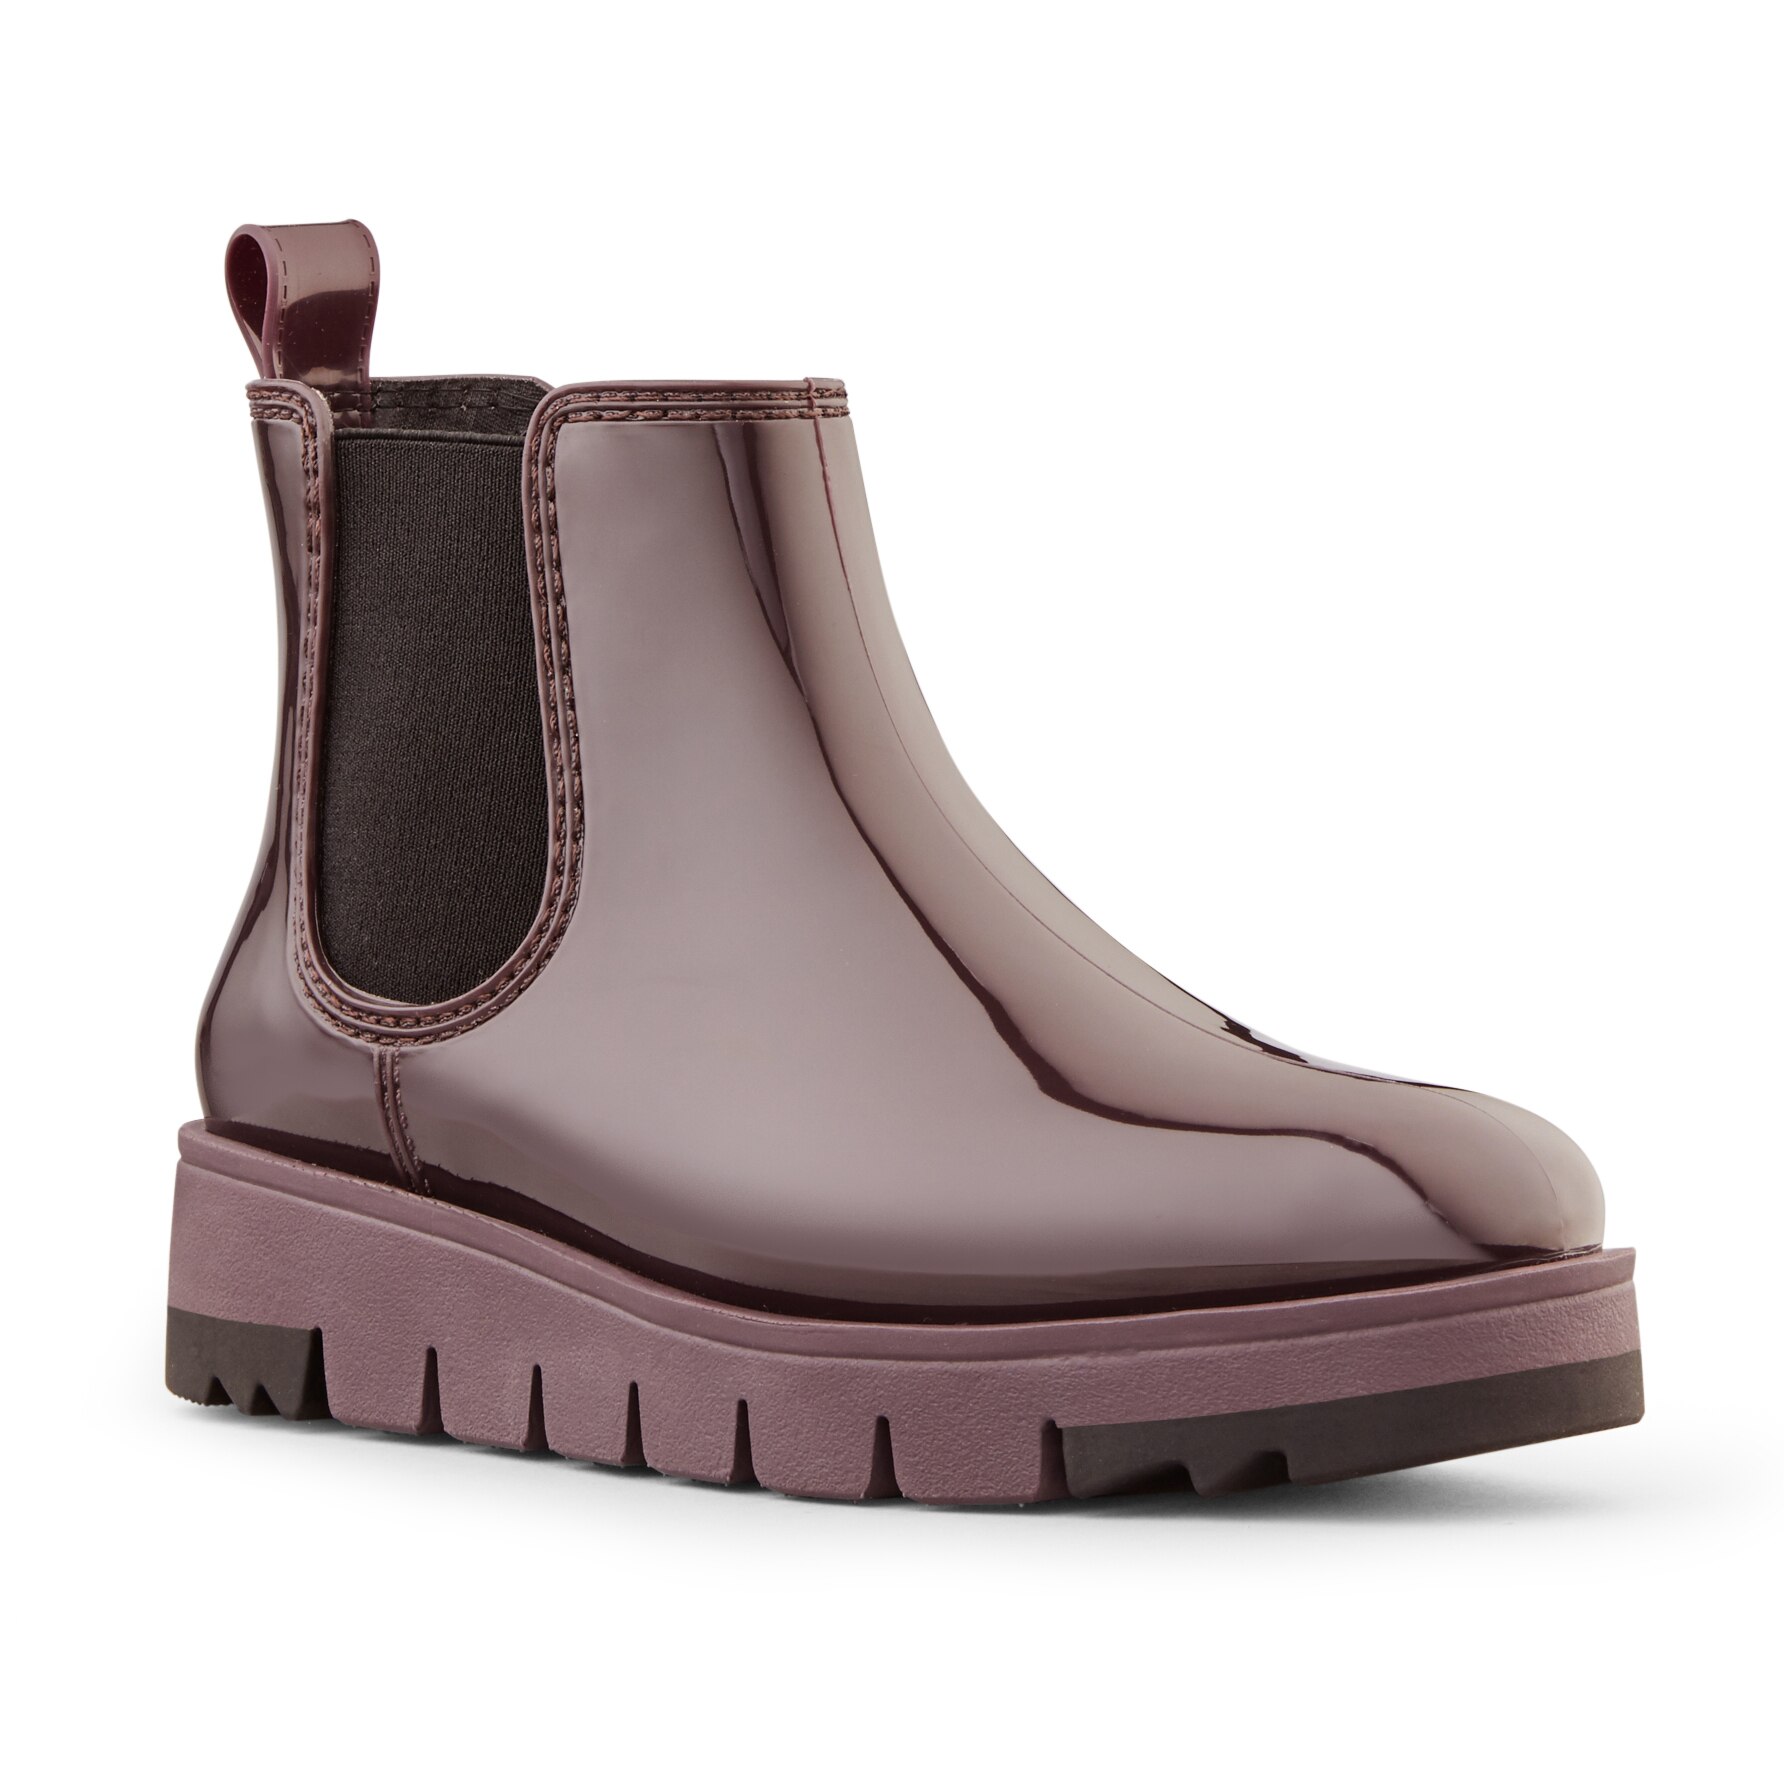 Clothing & Shoes - Shoes - Boots - Cougar Firenze Rain Boot